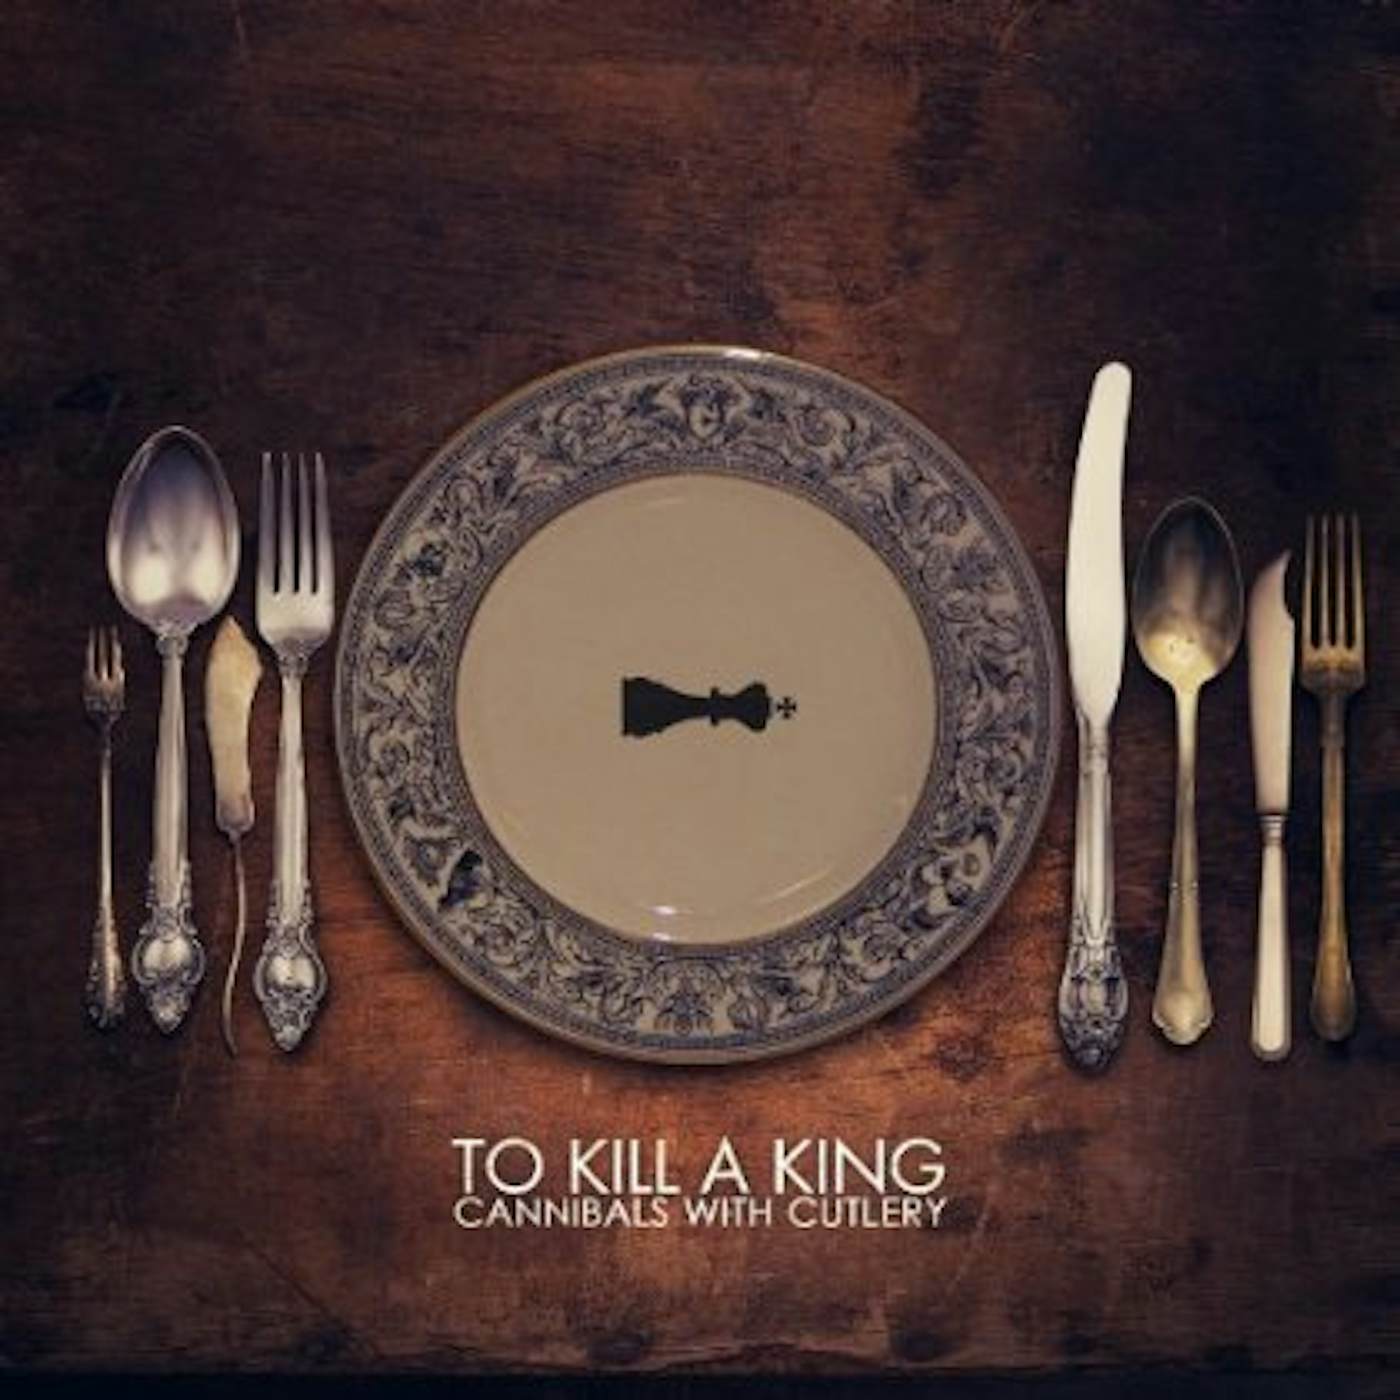 To Kill A King CANNIBALS WITH CUTLERY-DELUXE EDITION Vinyl Record - UK Release